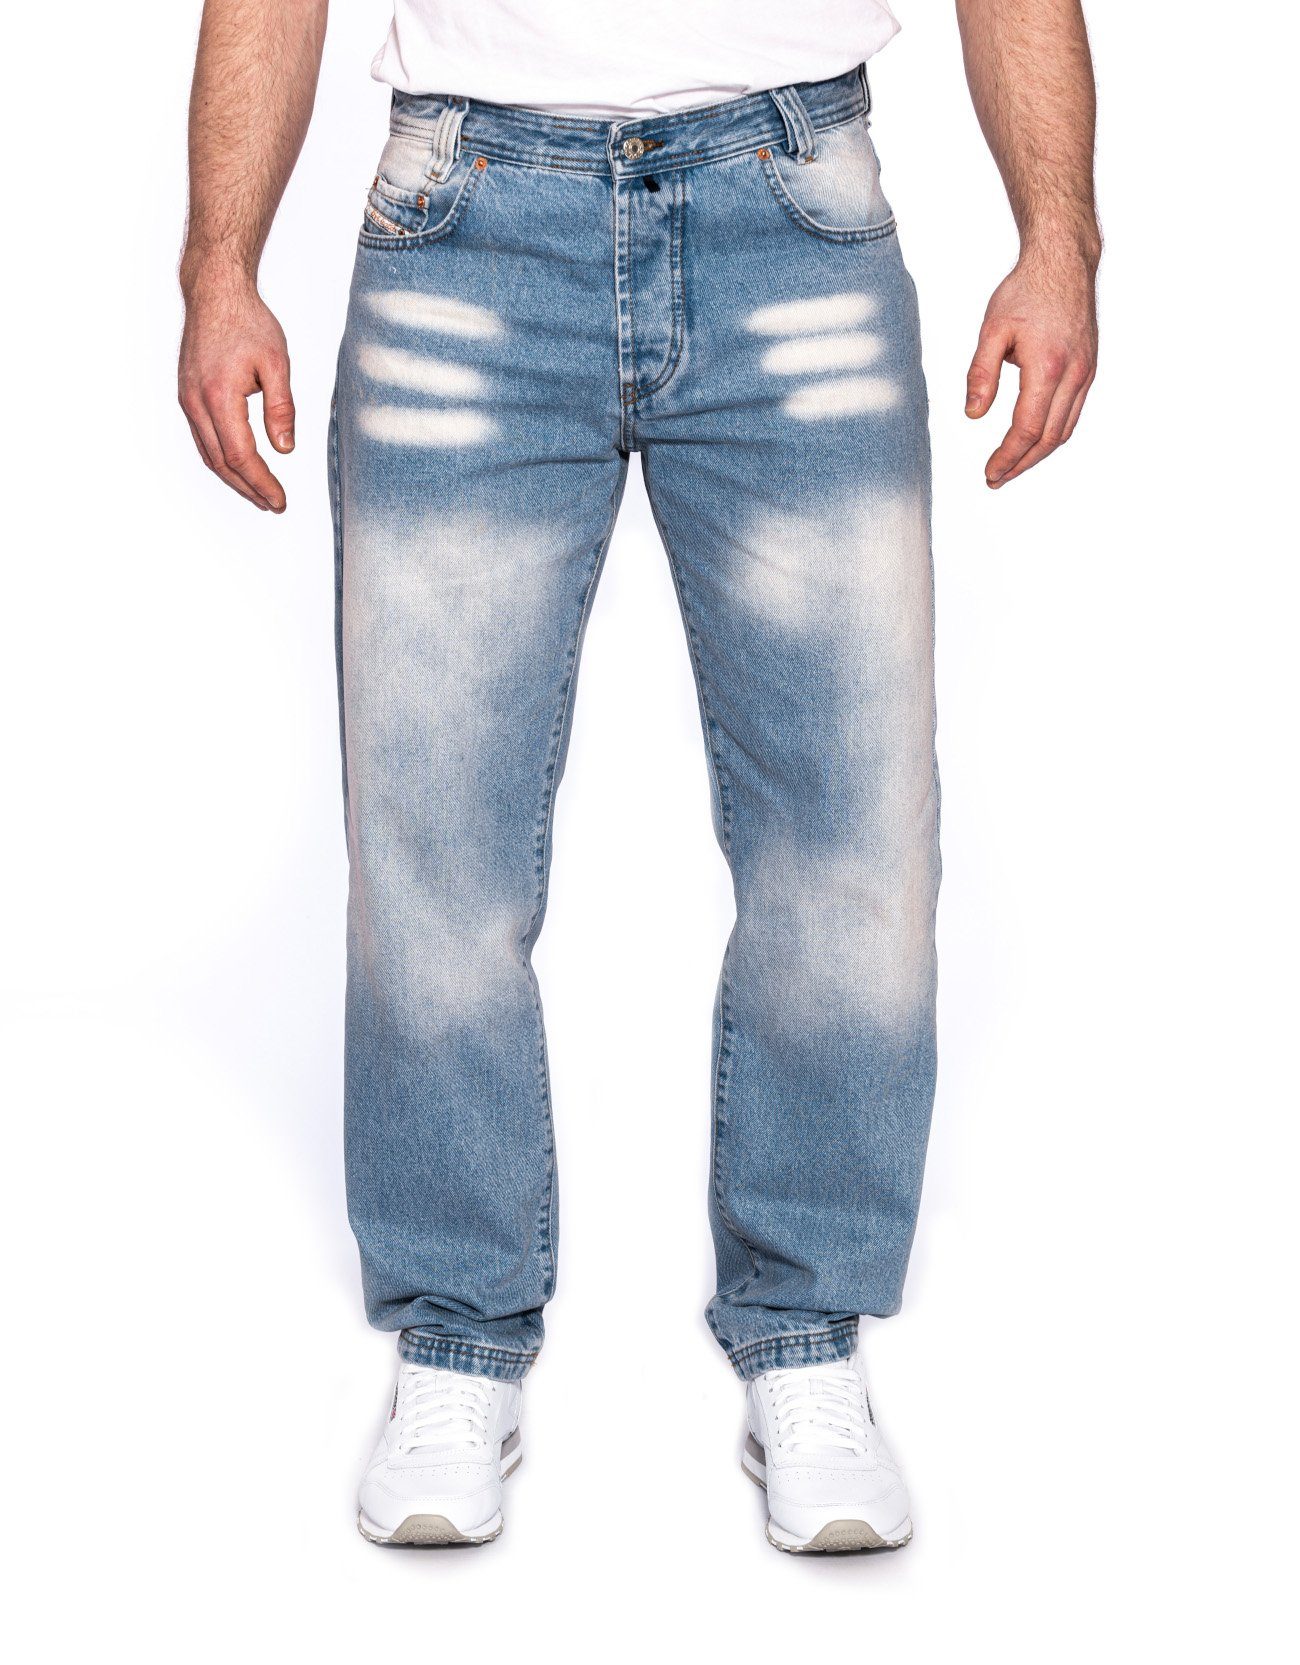 PICALDI Jeans Weite Jeans 472 Relaxed Fit Fit, Chemie 1 Zicco Loose